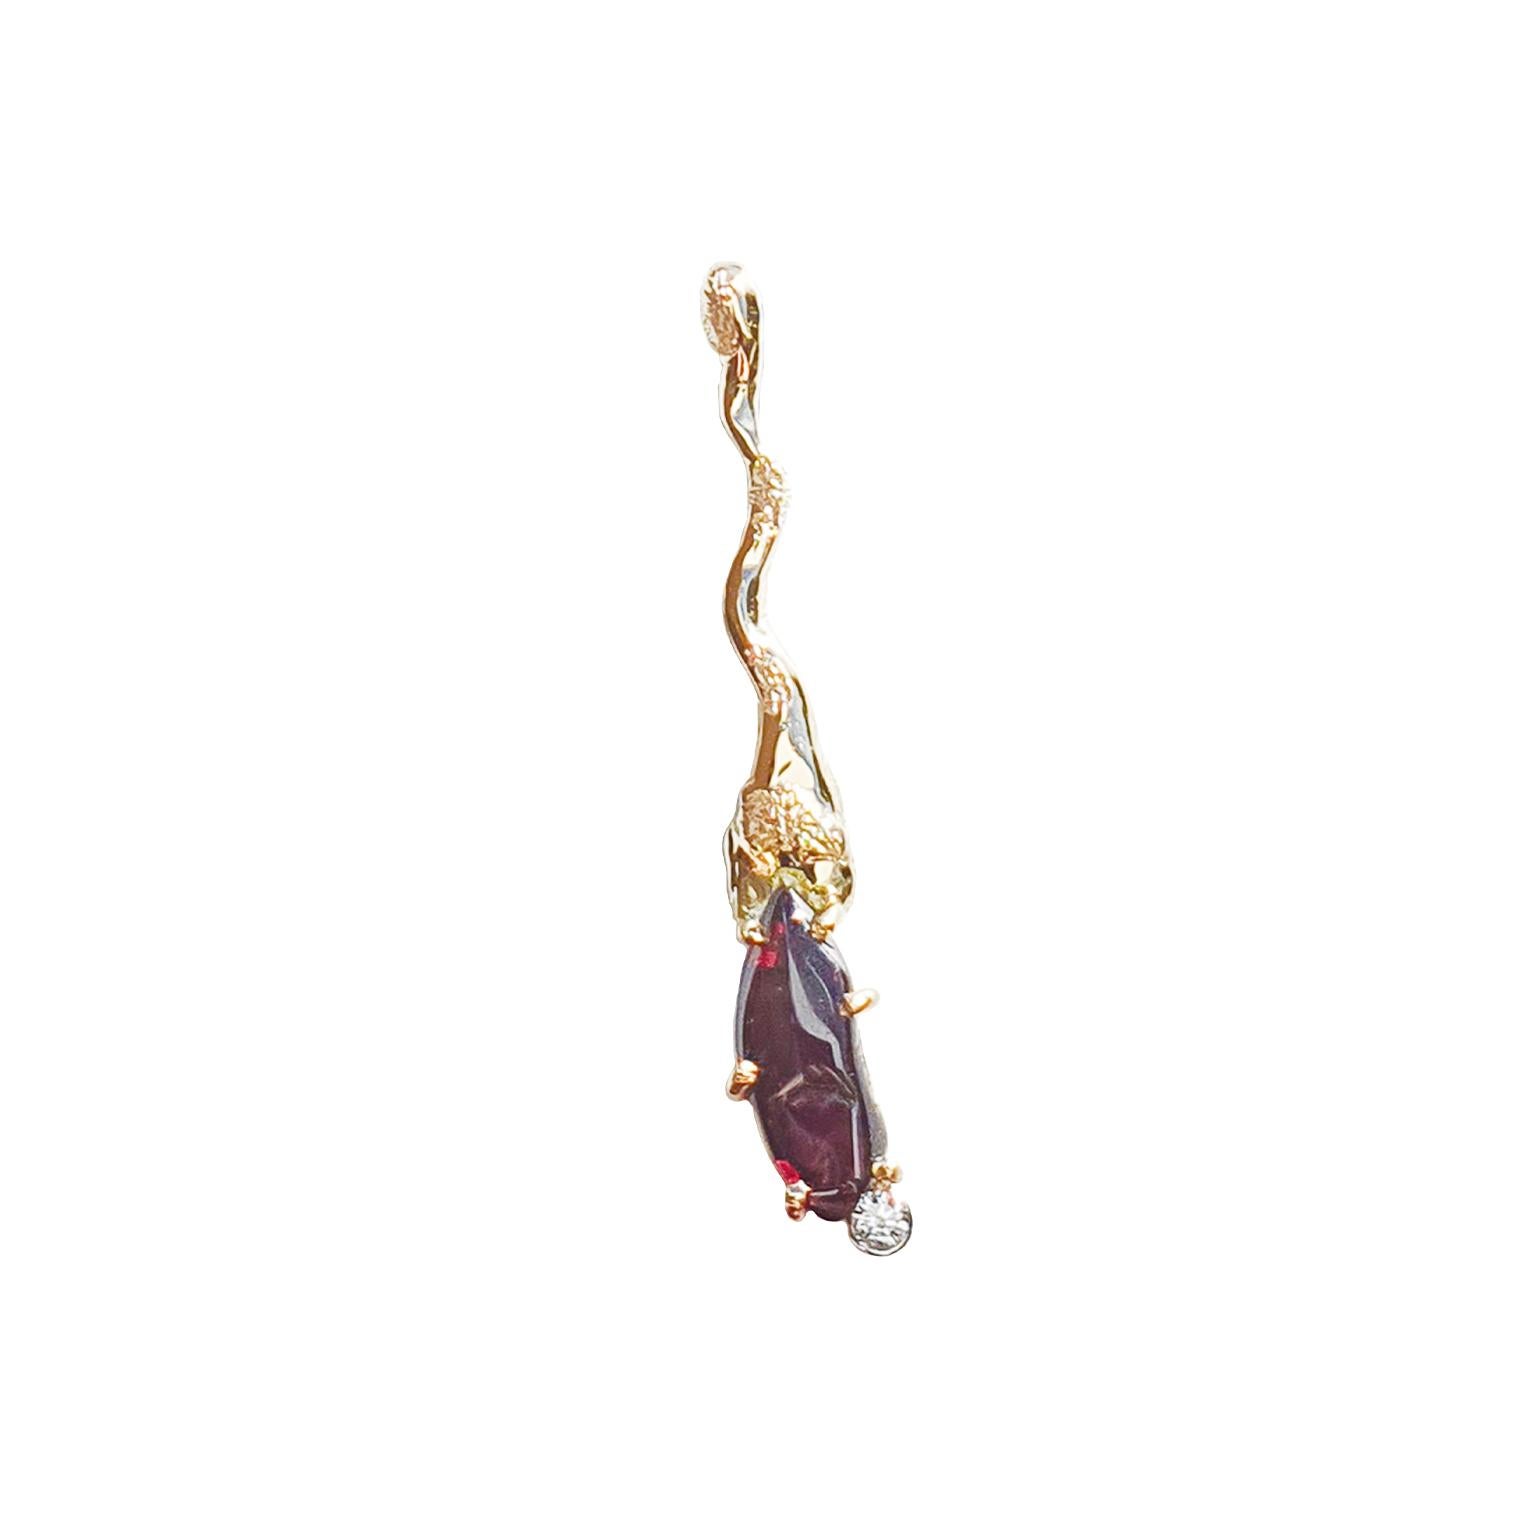 Paul Amey’s natural polished garnet pendant and earring set is elegantly simple yet sophisticated.

The natural garnet pendant is created from 18K yellow gold with a 3pt round white diamond set in platinum at the base of the natural garnet. The